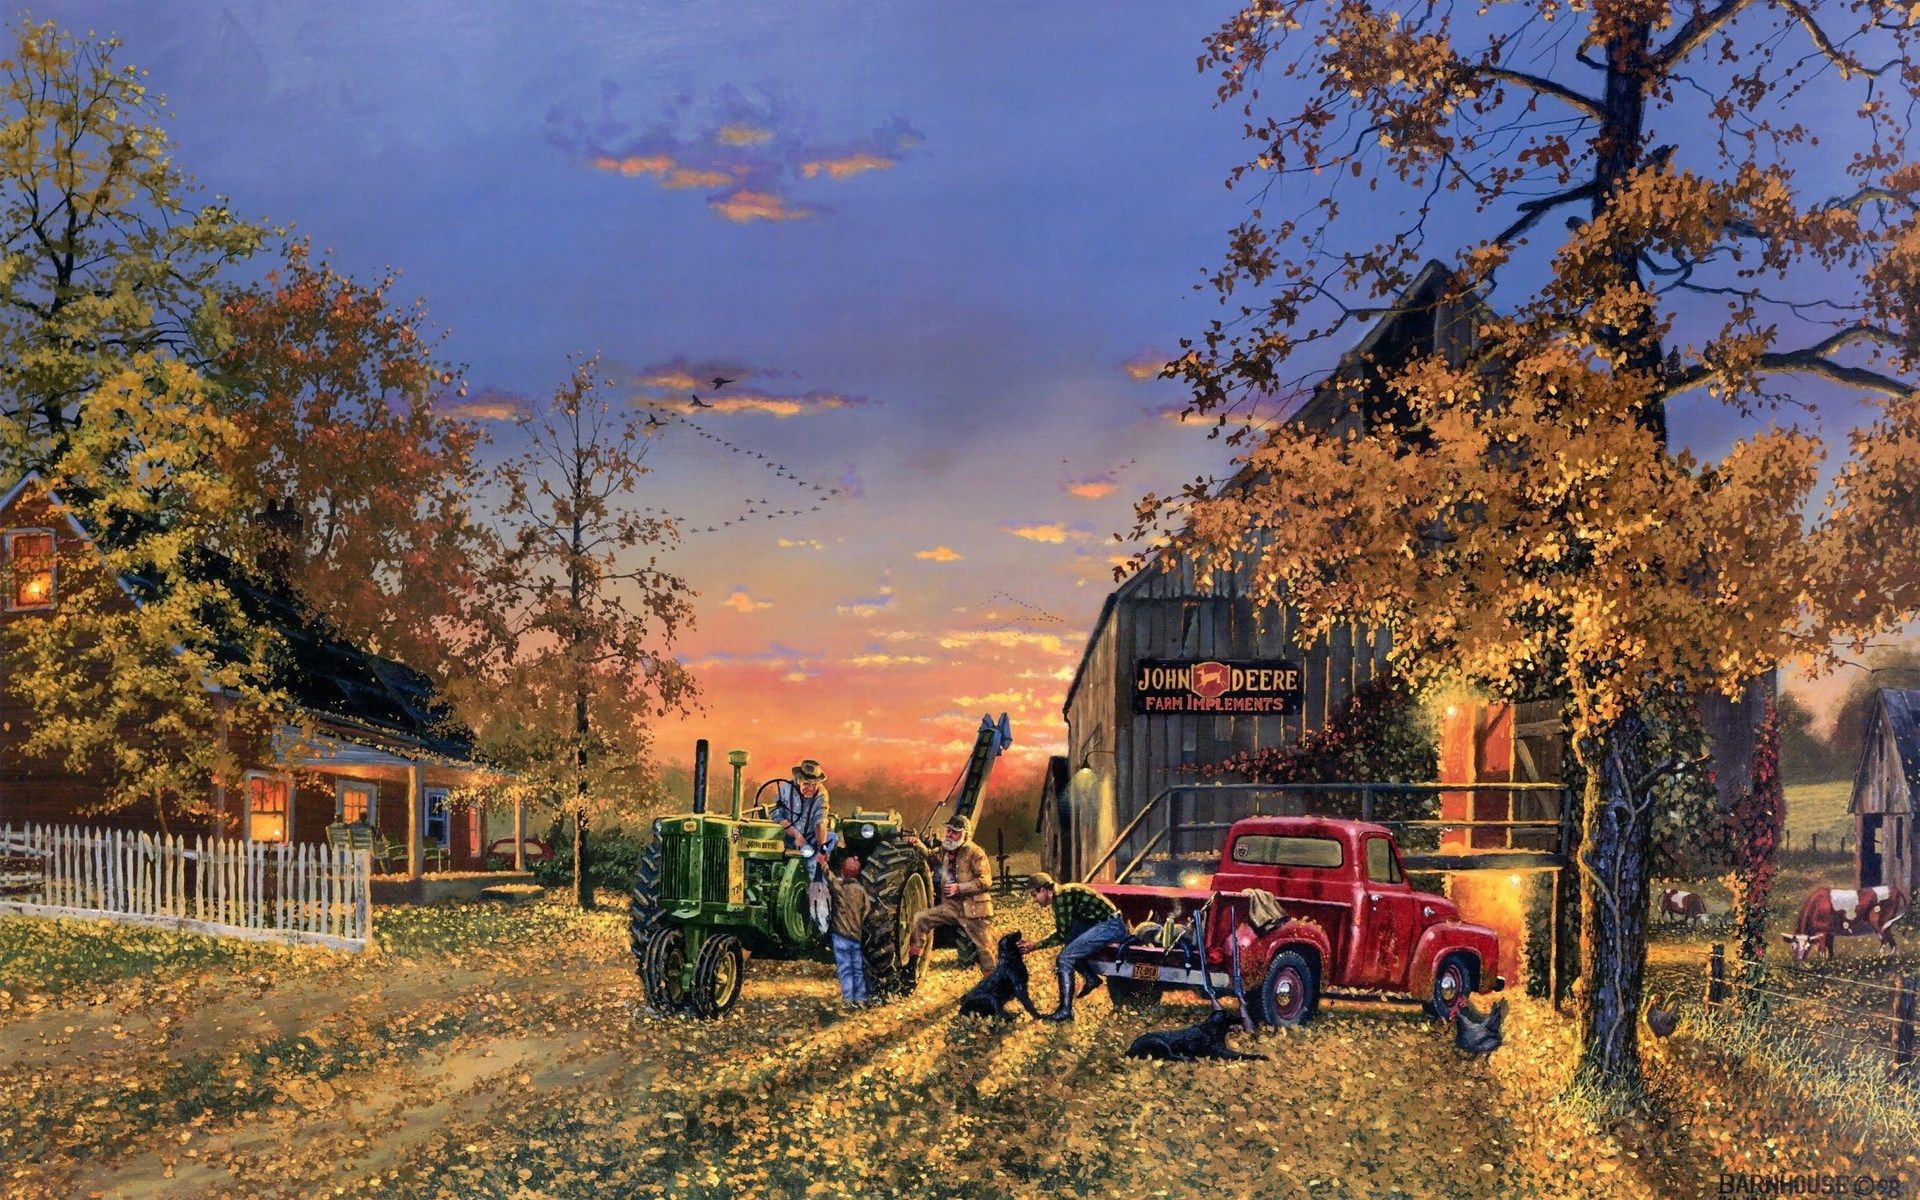 1920x1200 Dave-Barnhouse Barnhouse paintings country artistic farm vehicles tractor  people landscapes autumn fall seasons holidays thanksgiving wallpaper  background